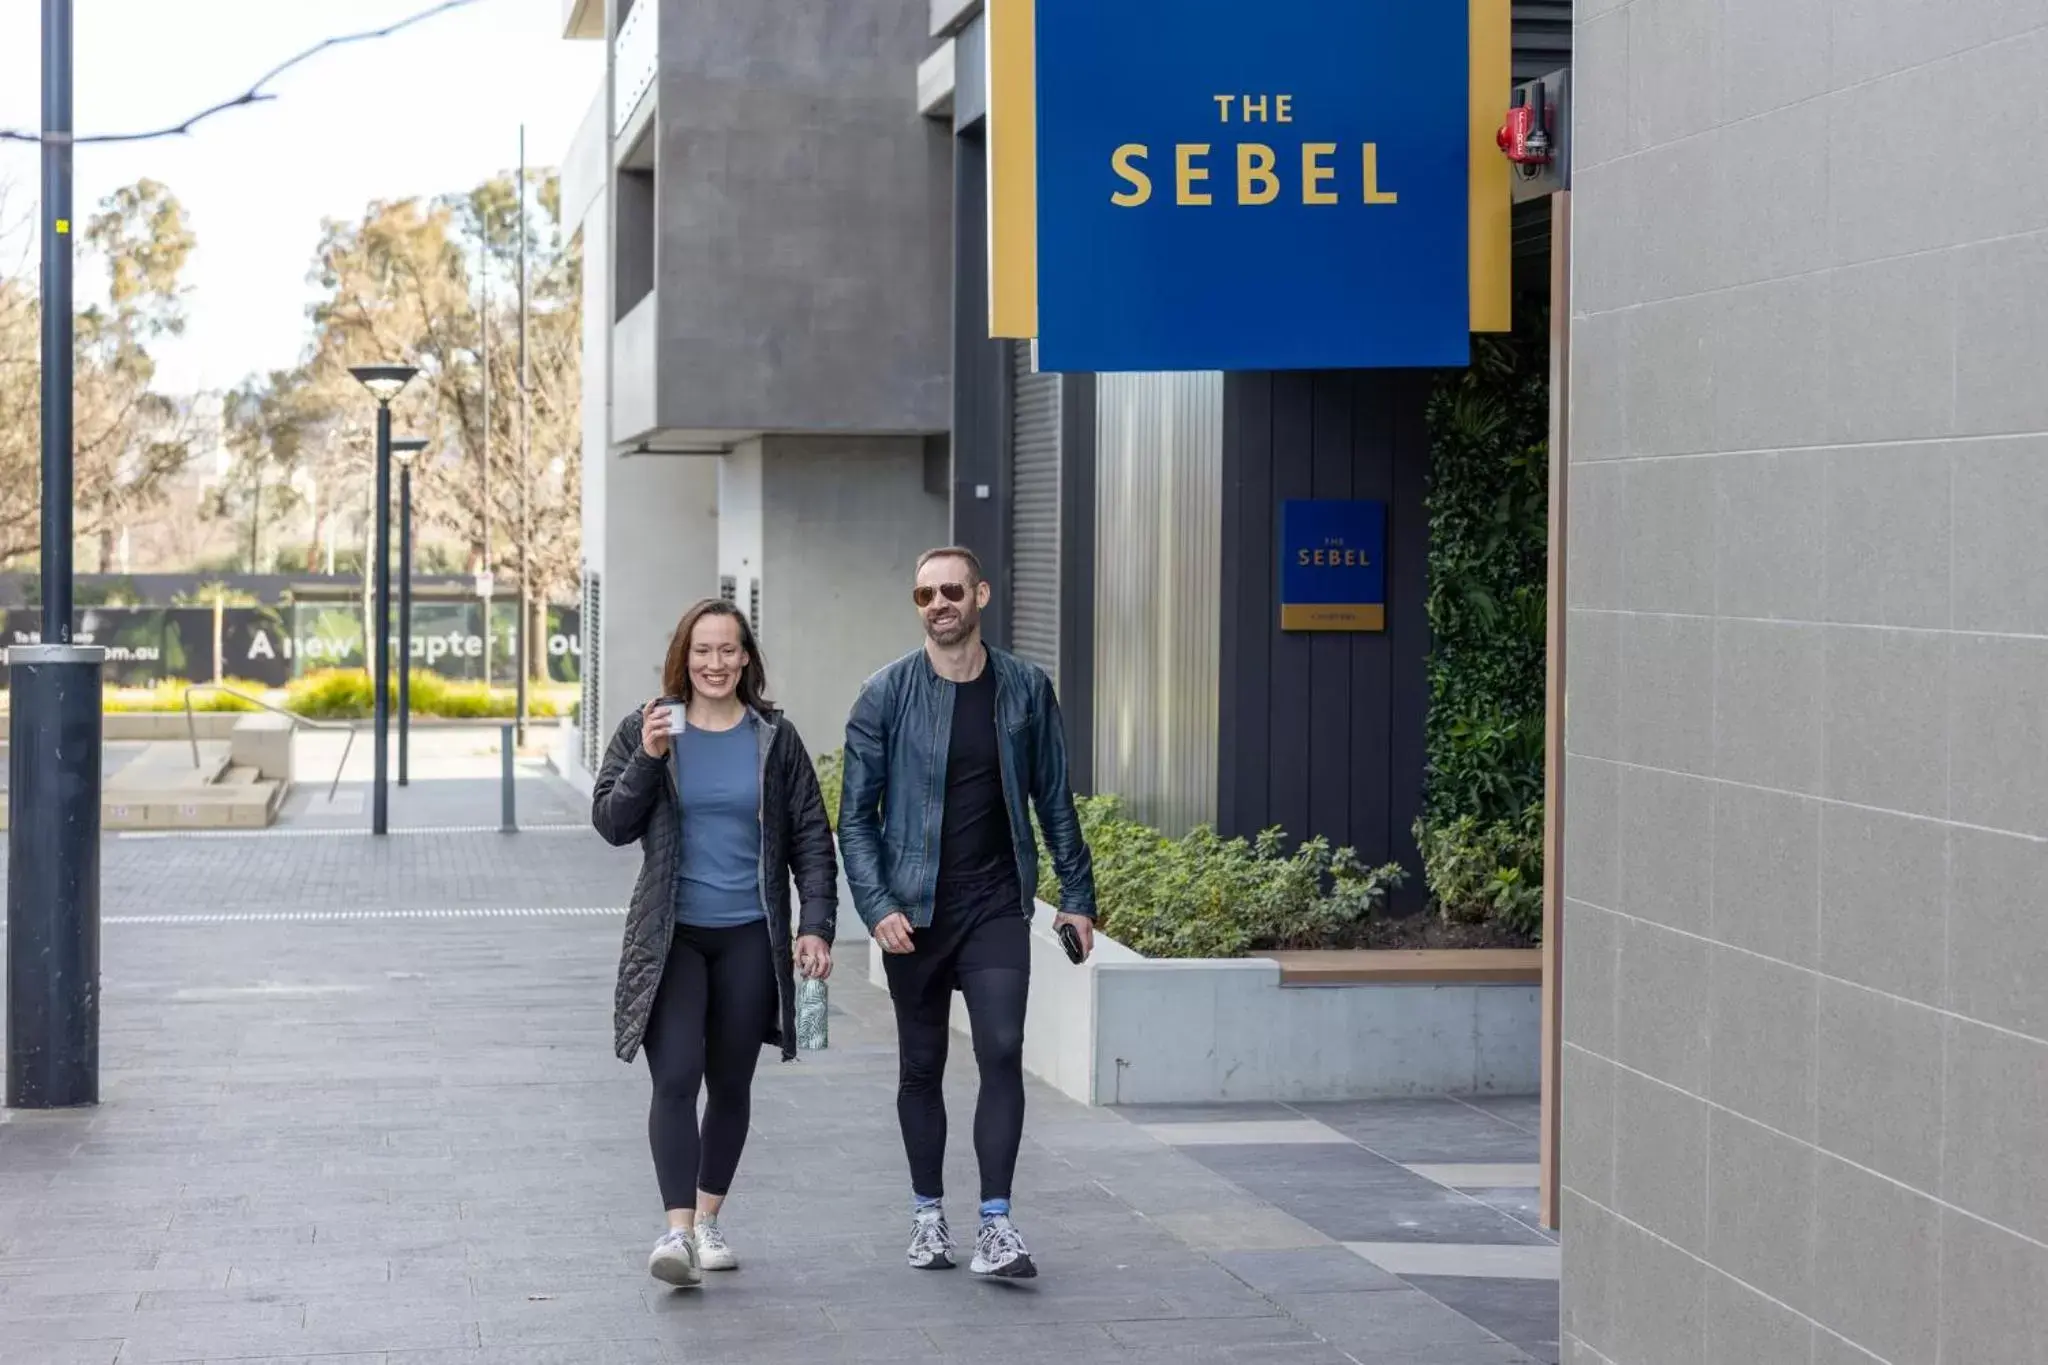 People in The Sebel Canberra Campbell